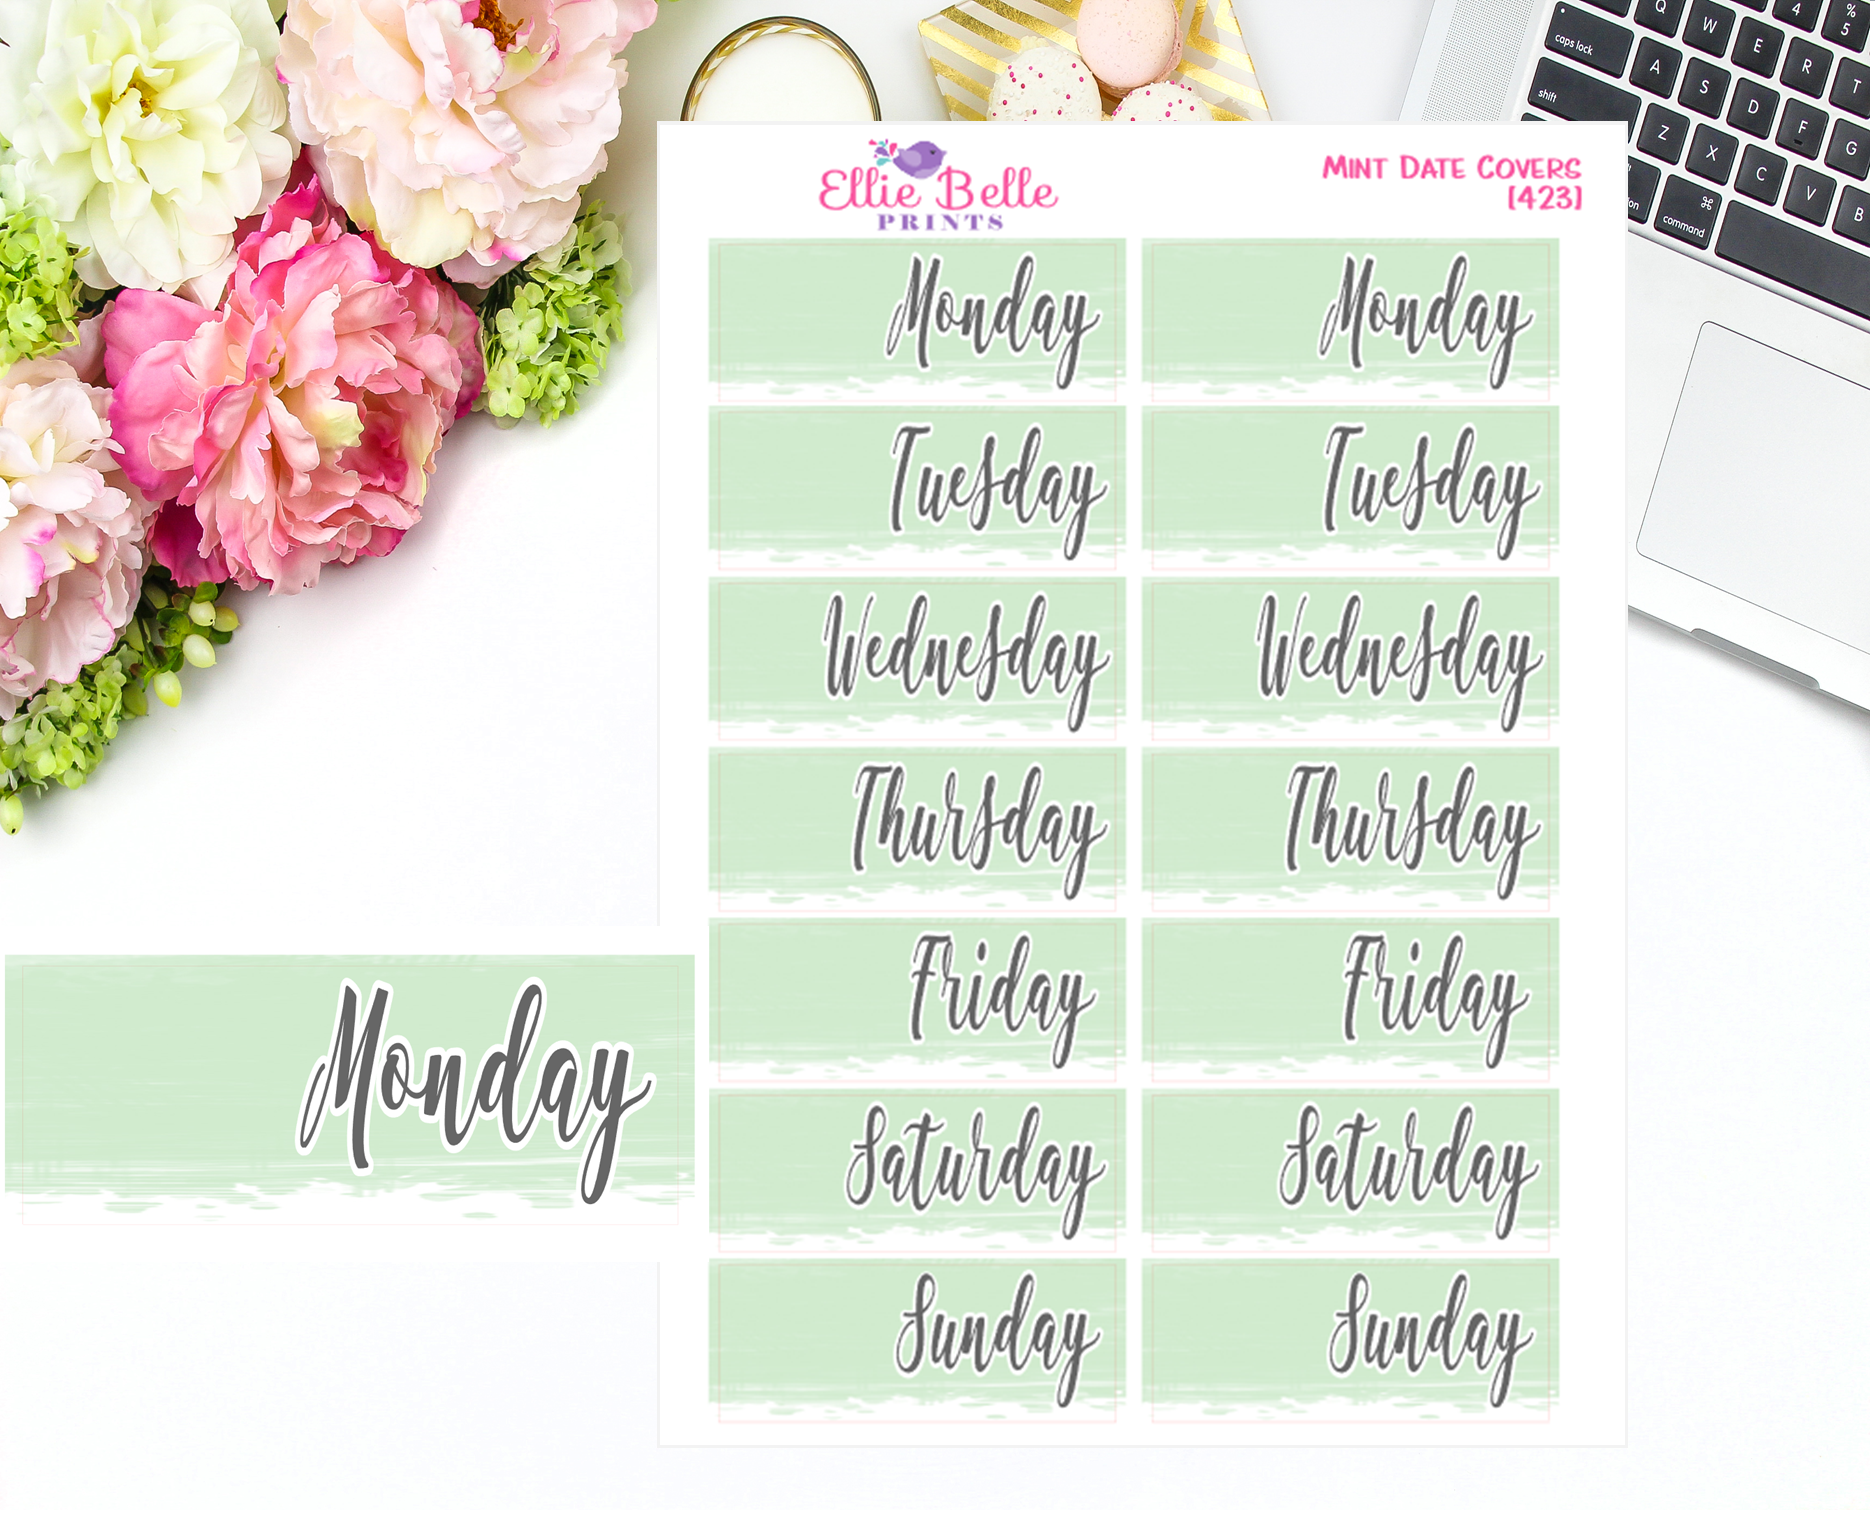 Date Cover Stickers - 2 Weeks - Mint Watercolour